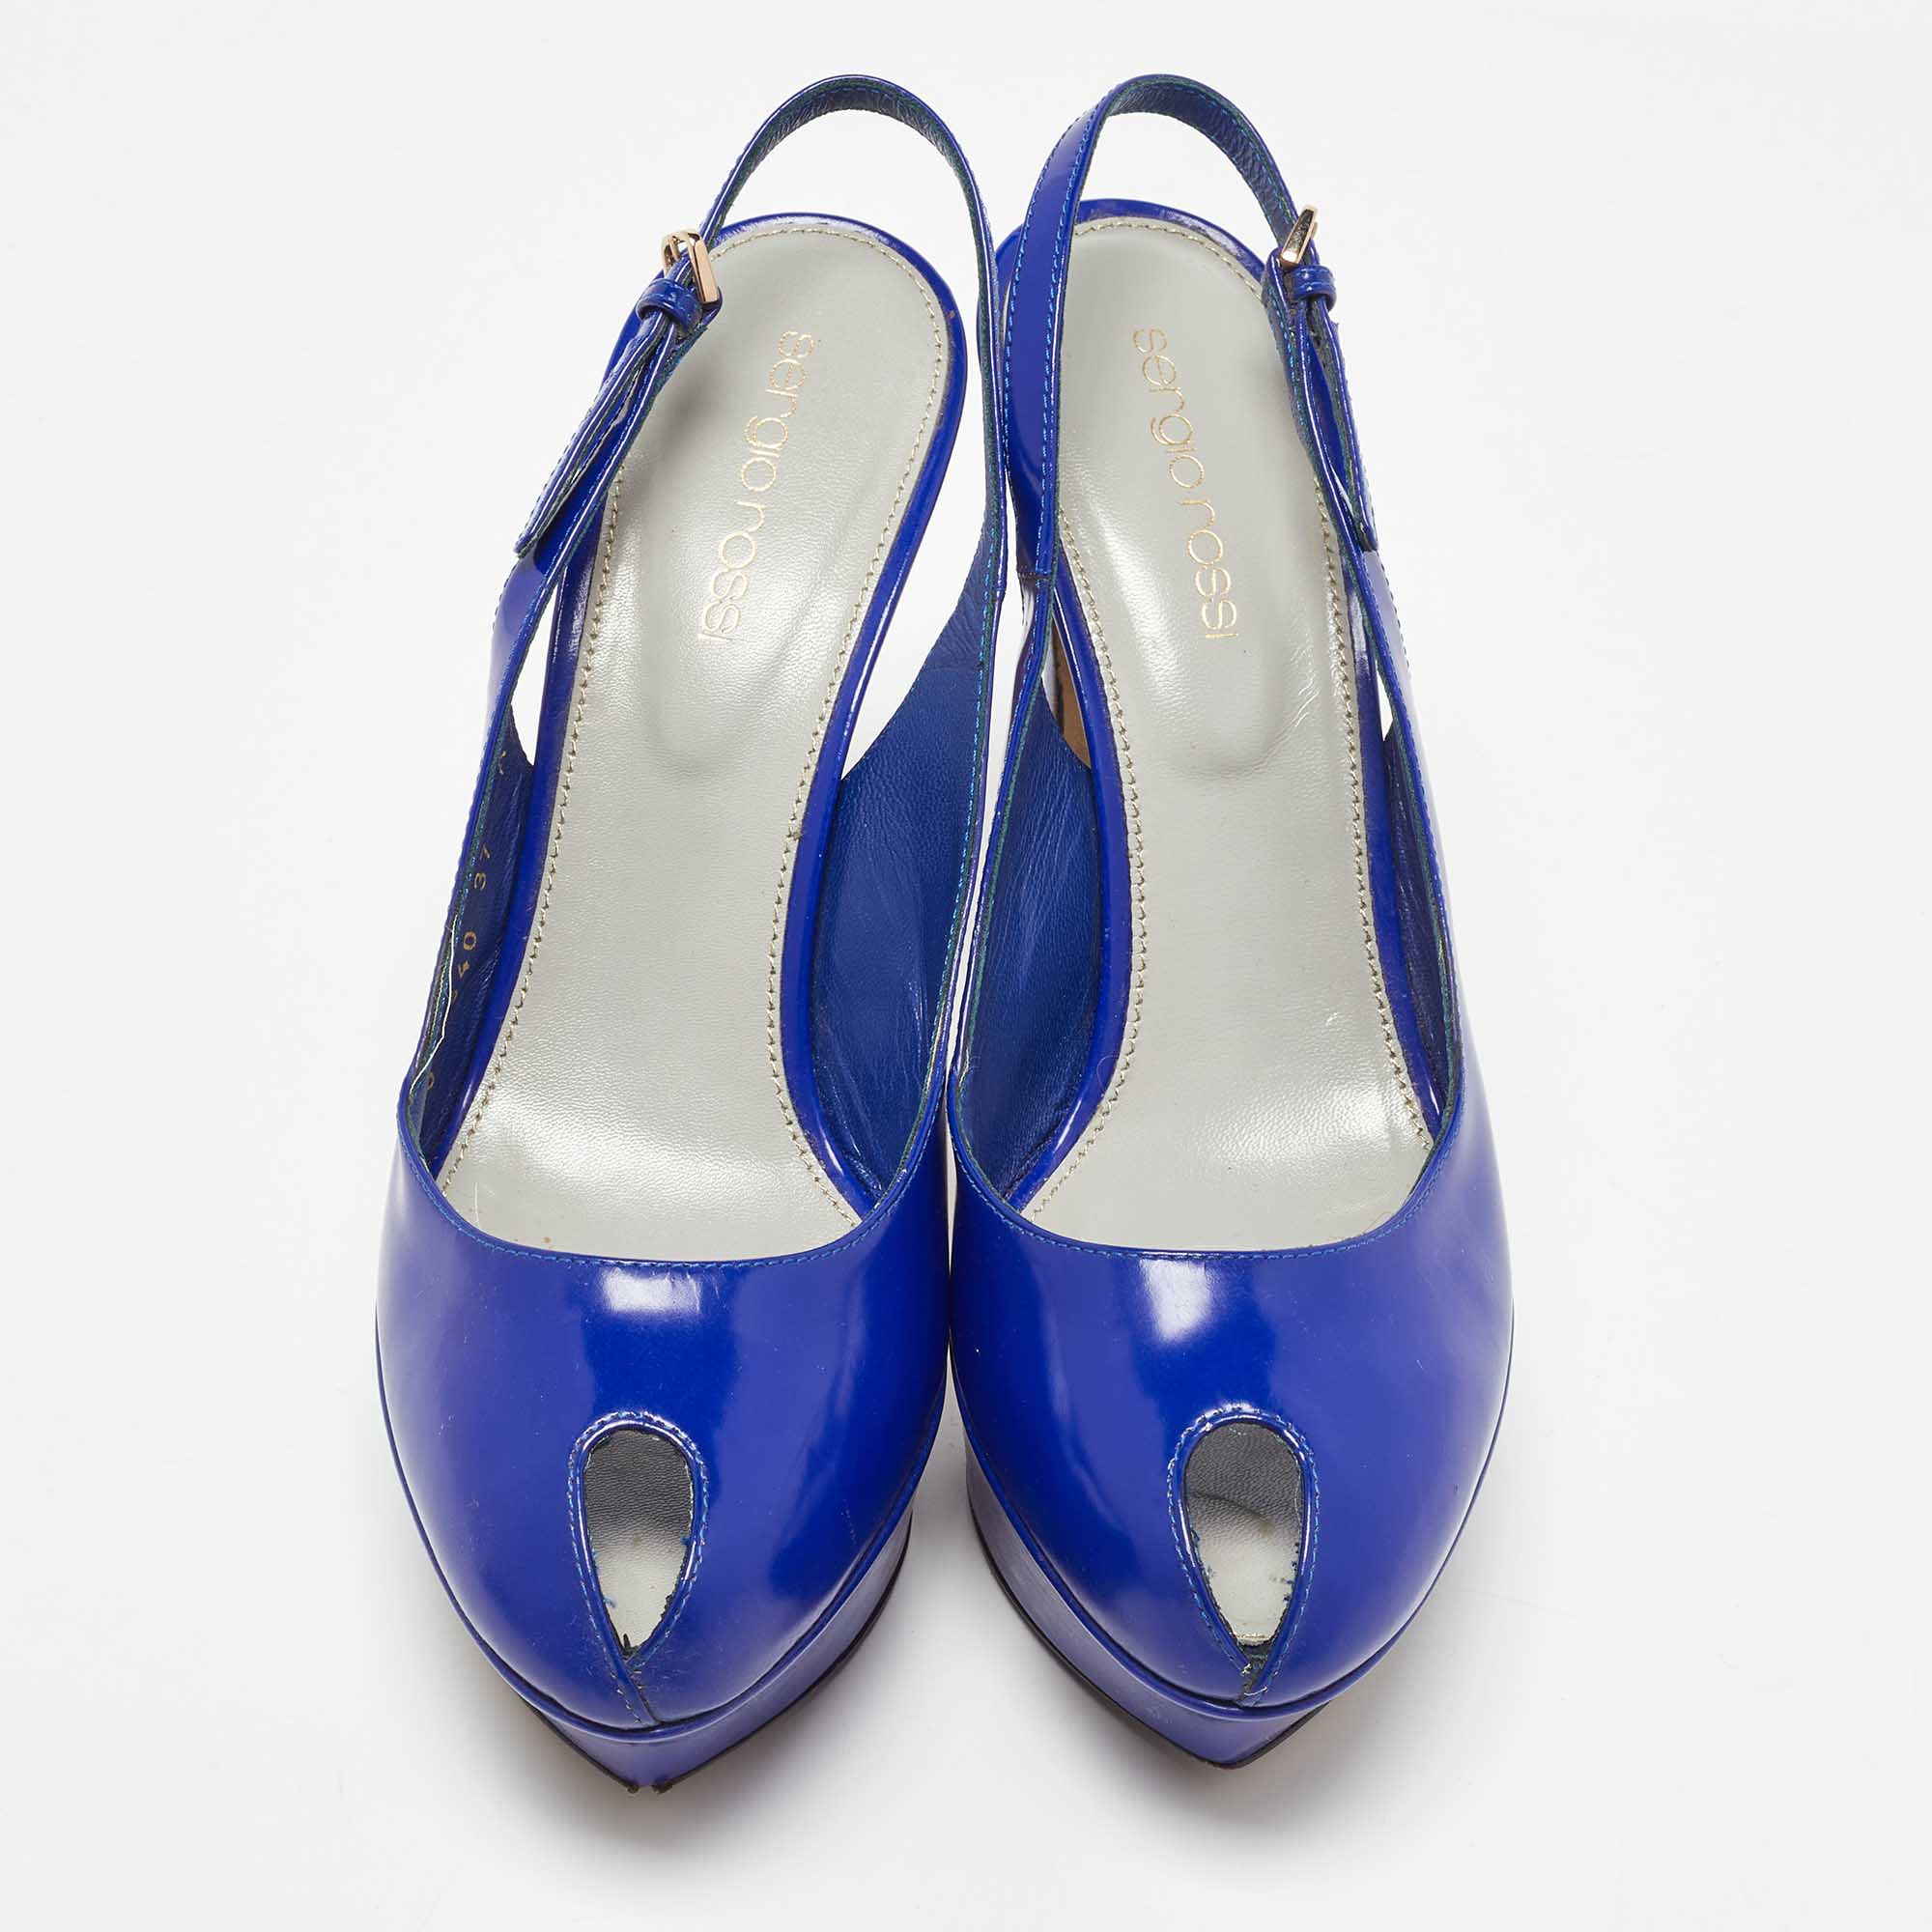 Sergio Rossi Blue Patent Leather Cachet Slingback Pumps Size 37